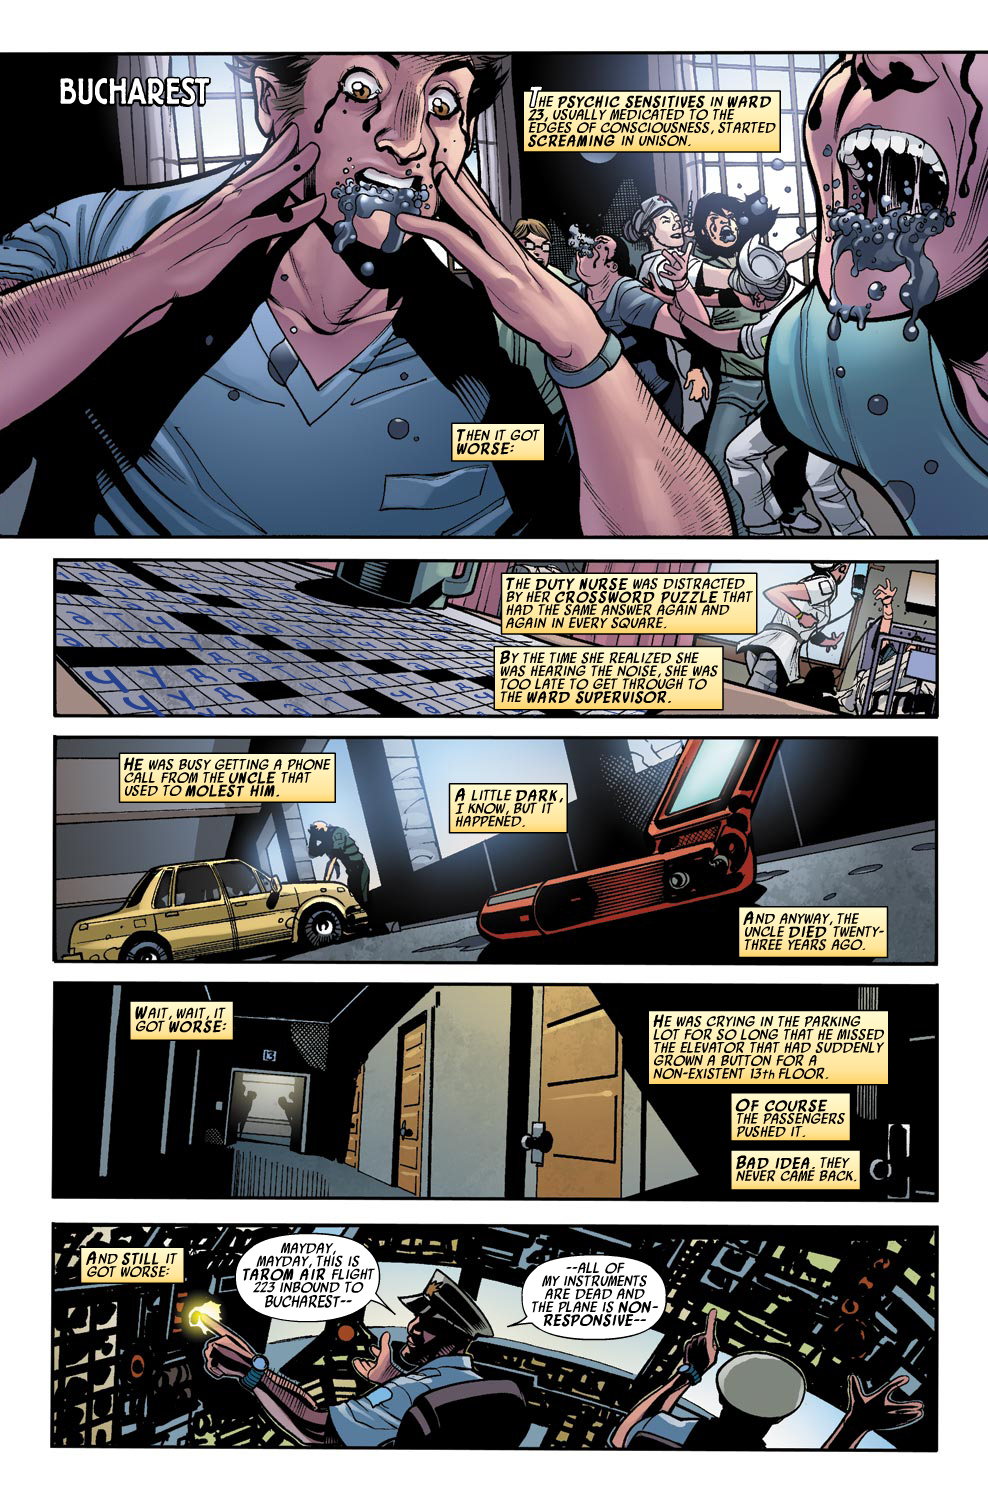 Defenders (2012) Issue #1 #1 - English 2